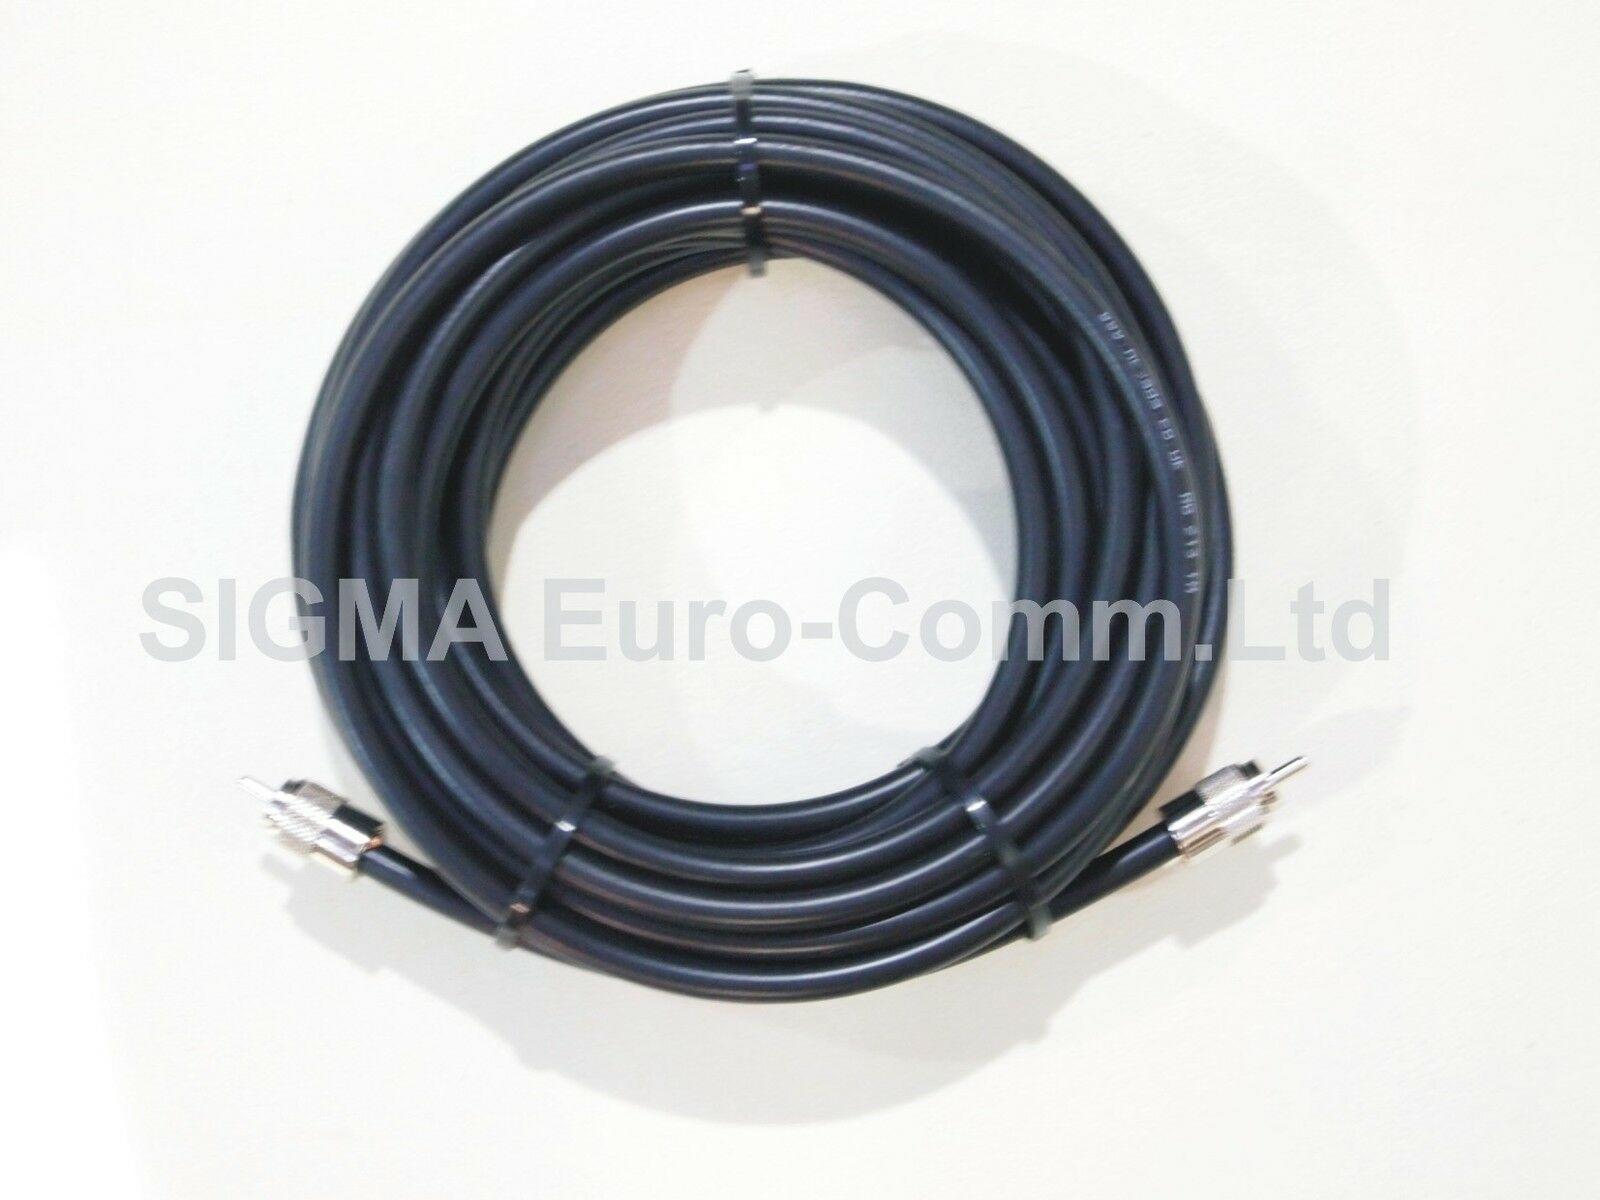 Sigma RG213 Low Loss 50 Ohm Coaxial Cable 30m Fitted With 2 x PL259 Male Connectors